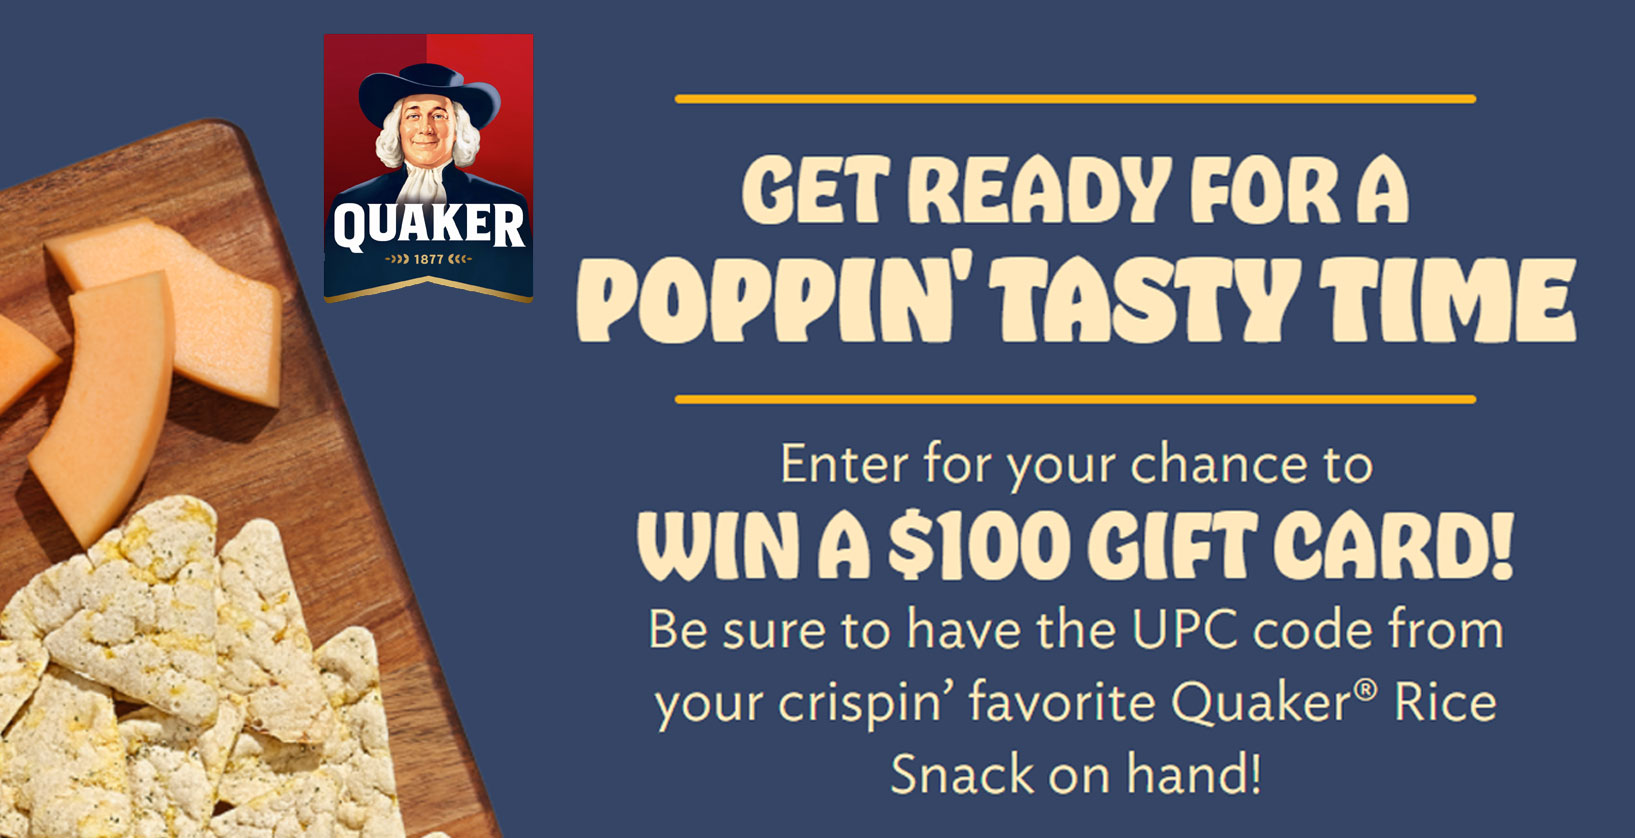 Tag a friend and then play the Quaker Oats Snackboard Instant Win Game daily for your chance to WIN A $100 GIFT CARD There will be 490 winners in all. Click through to get your FREE UPC code to play.